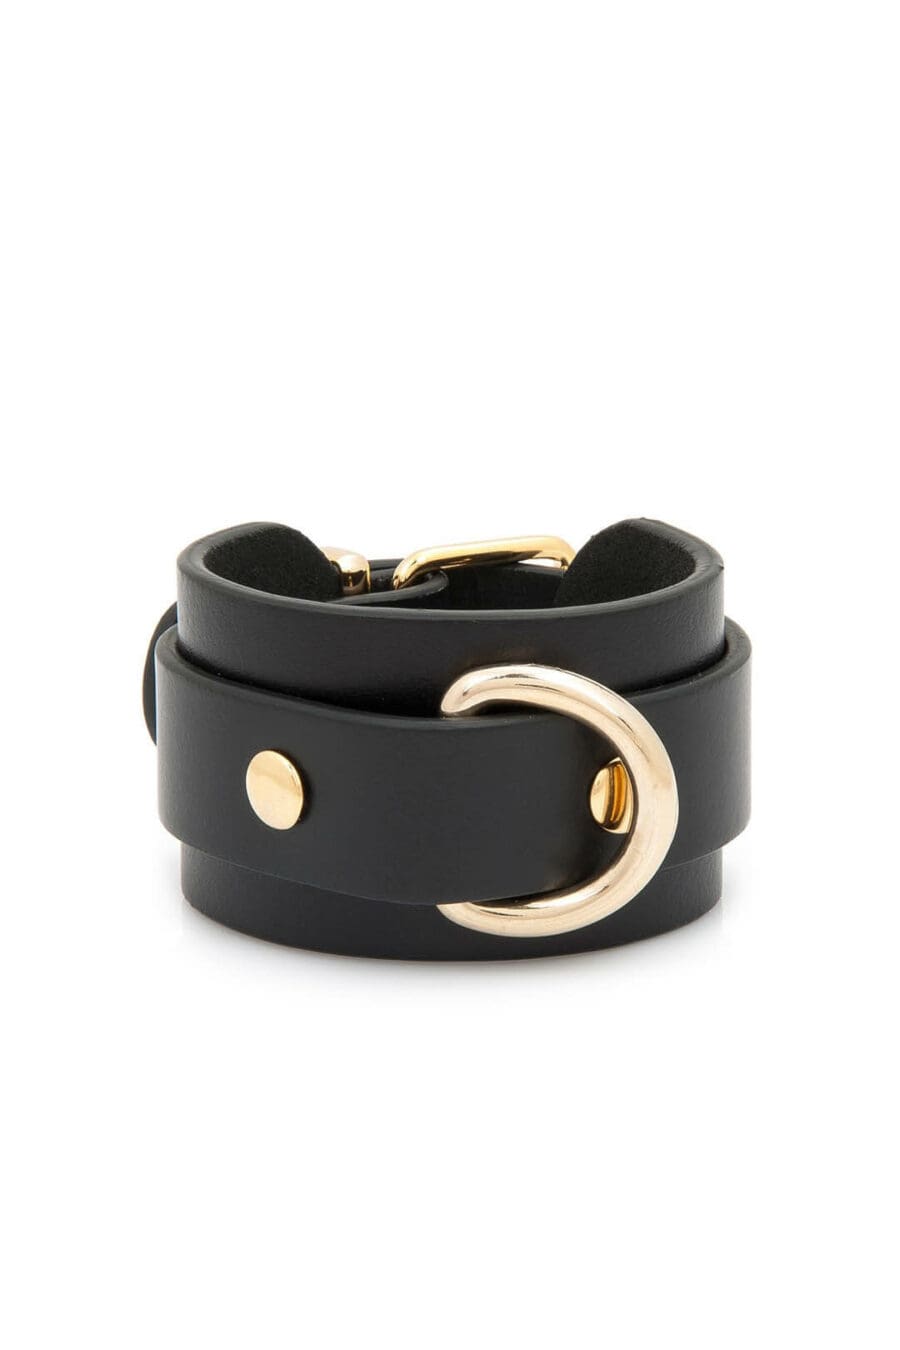 Elif Domanic Buckle Handcuffs With Choker